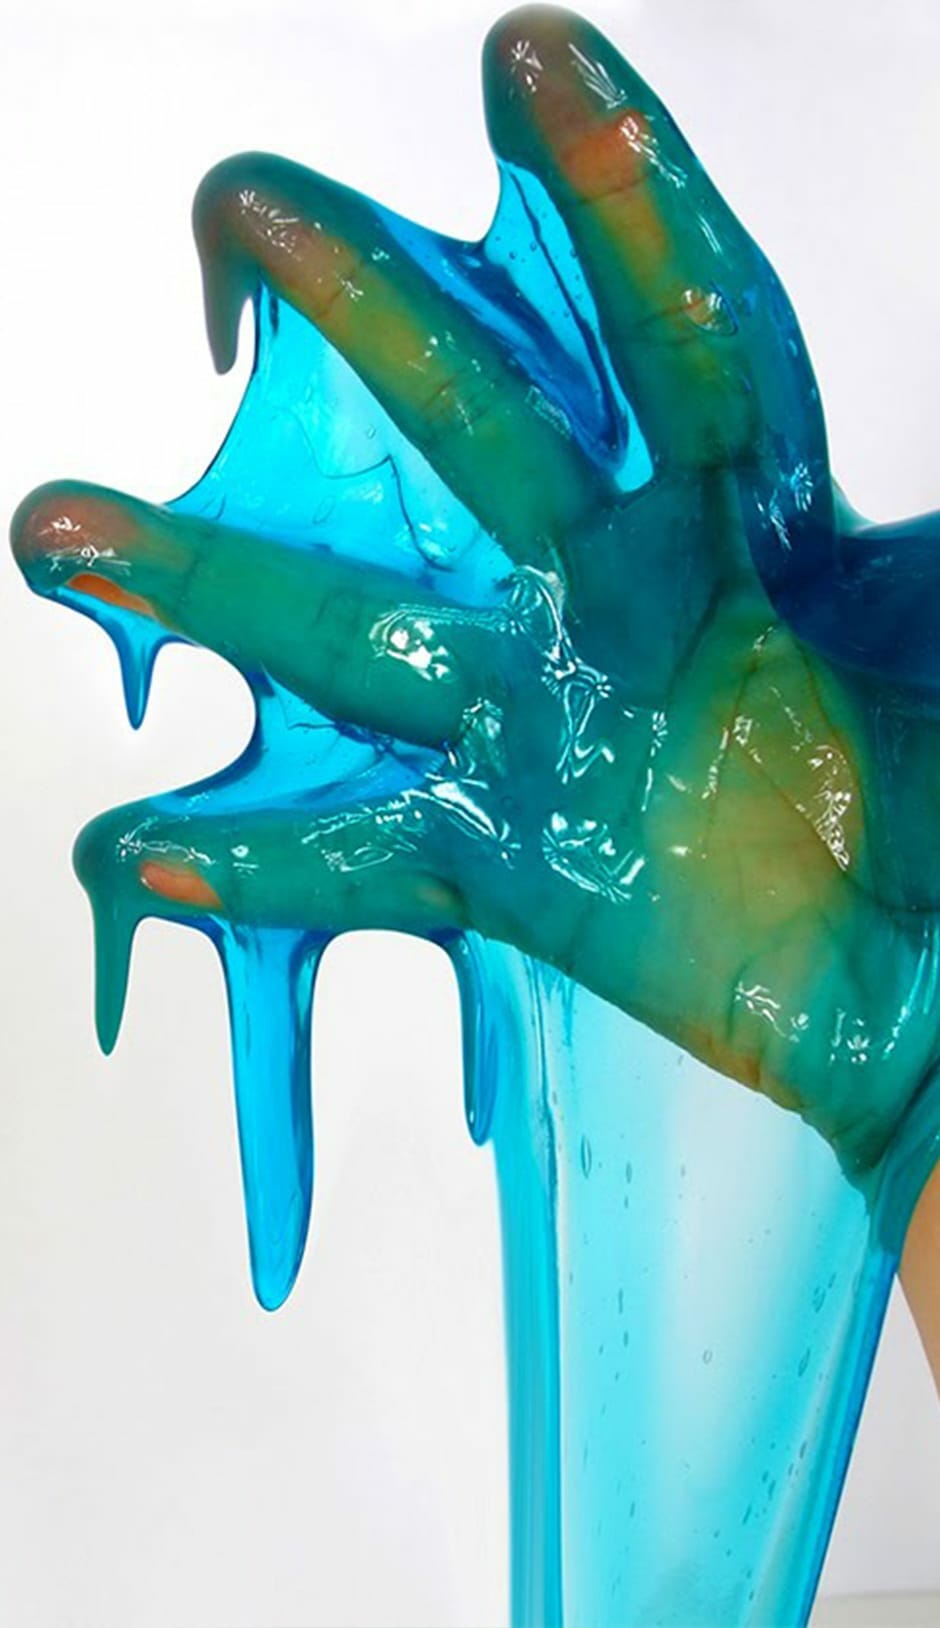 Kid's hand covered in blue and green slime for STEM